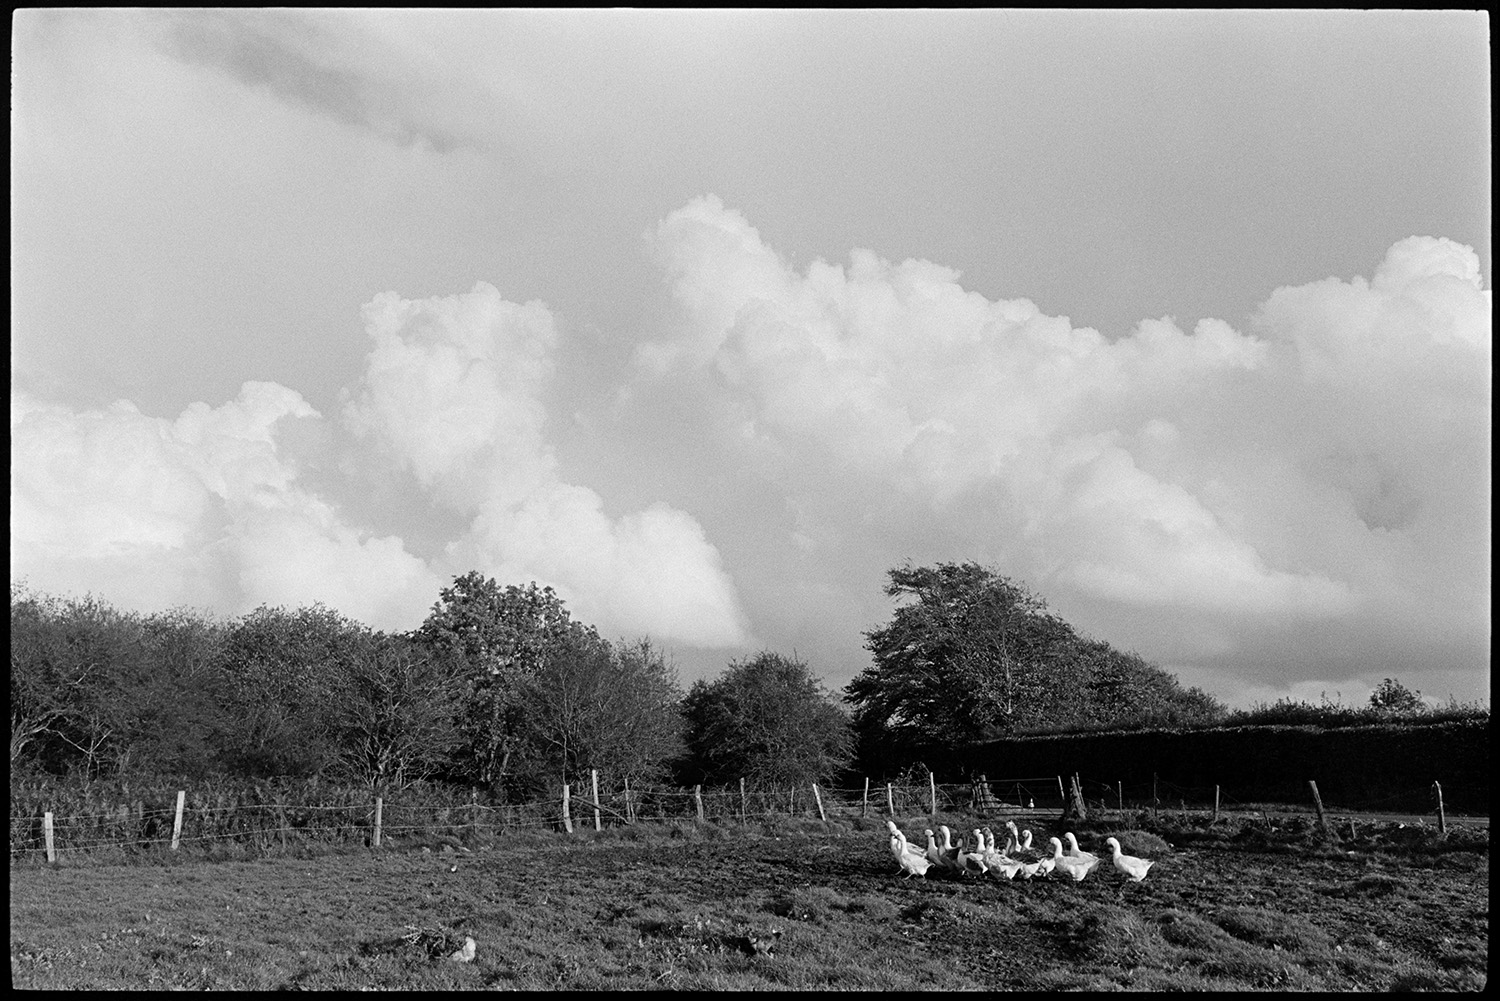 Cloudy landscape with geese and white cow. 
[A small flock of geese in the corner of a field at Cuppers Piece, Beaford. The field has a fence and hedge around it and clouds can be seen in the sky above.]